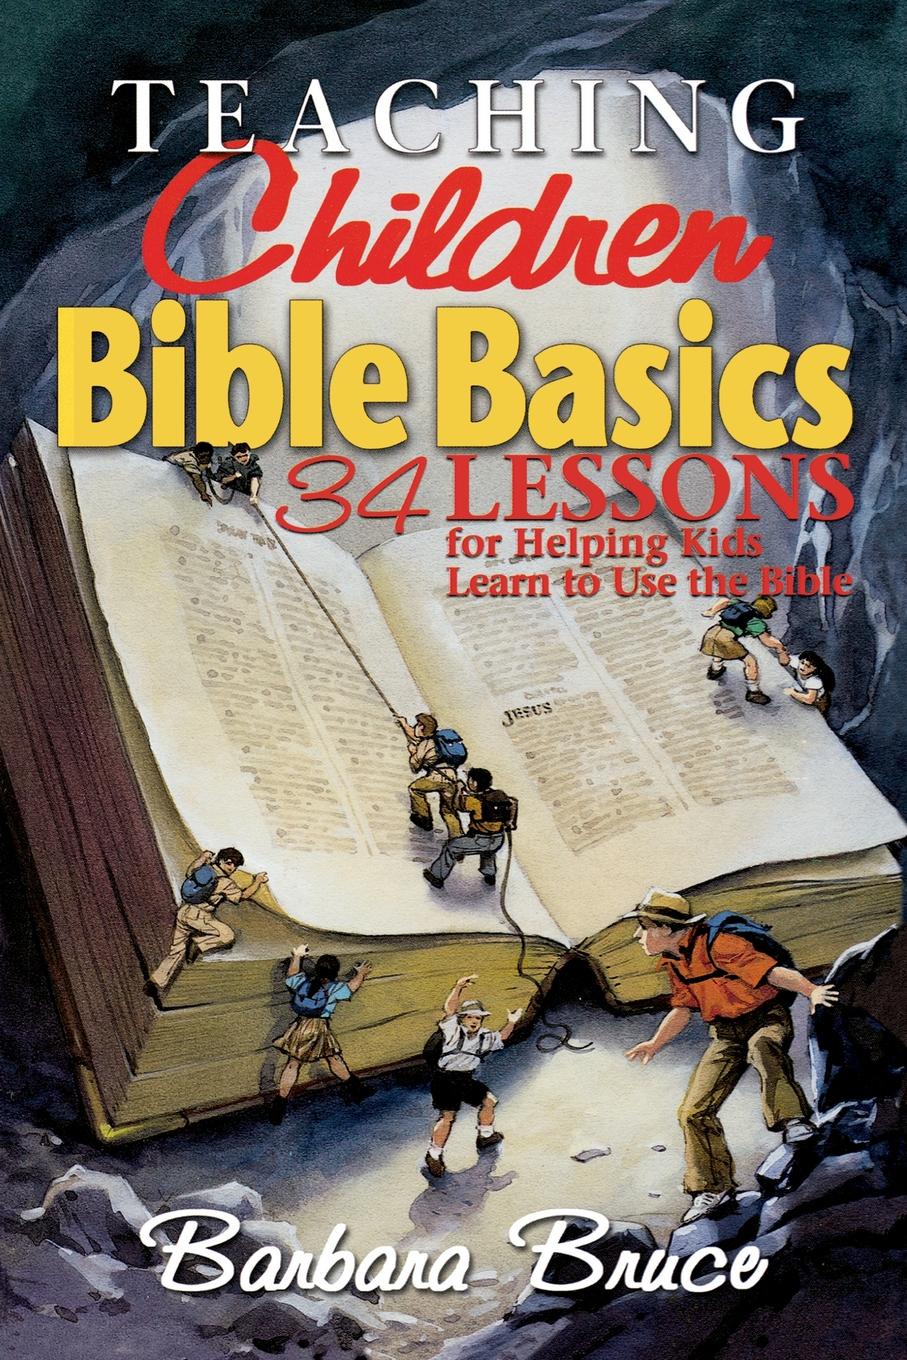 Teaching Children Bible Basics. 34 Lessons for Helping Children Learn to Use the Bible